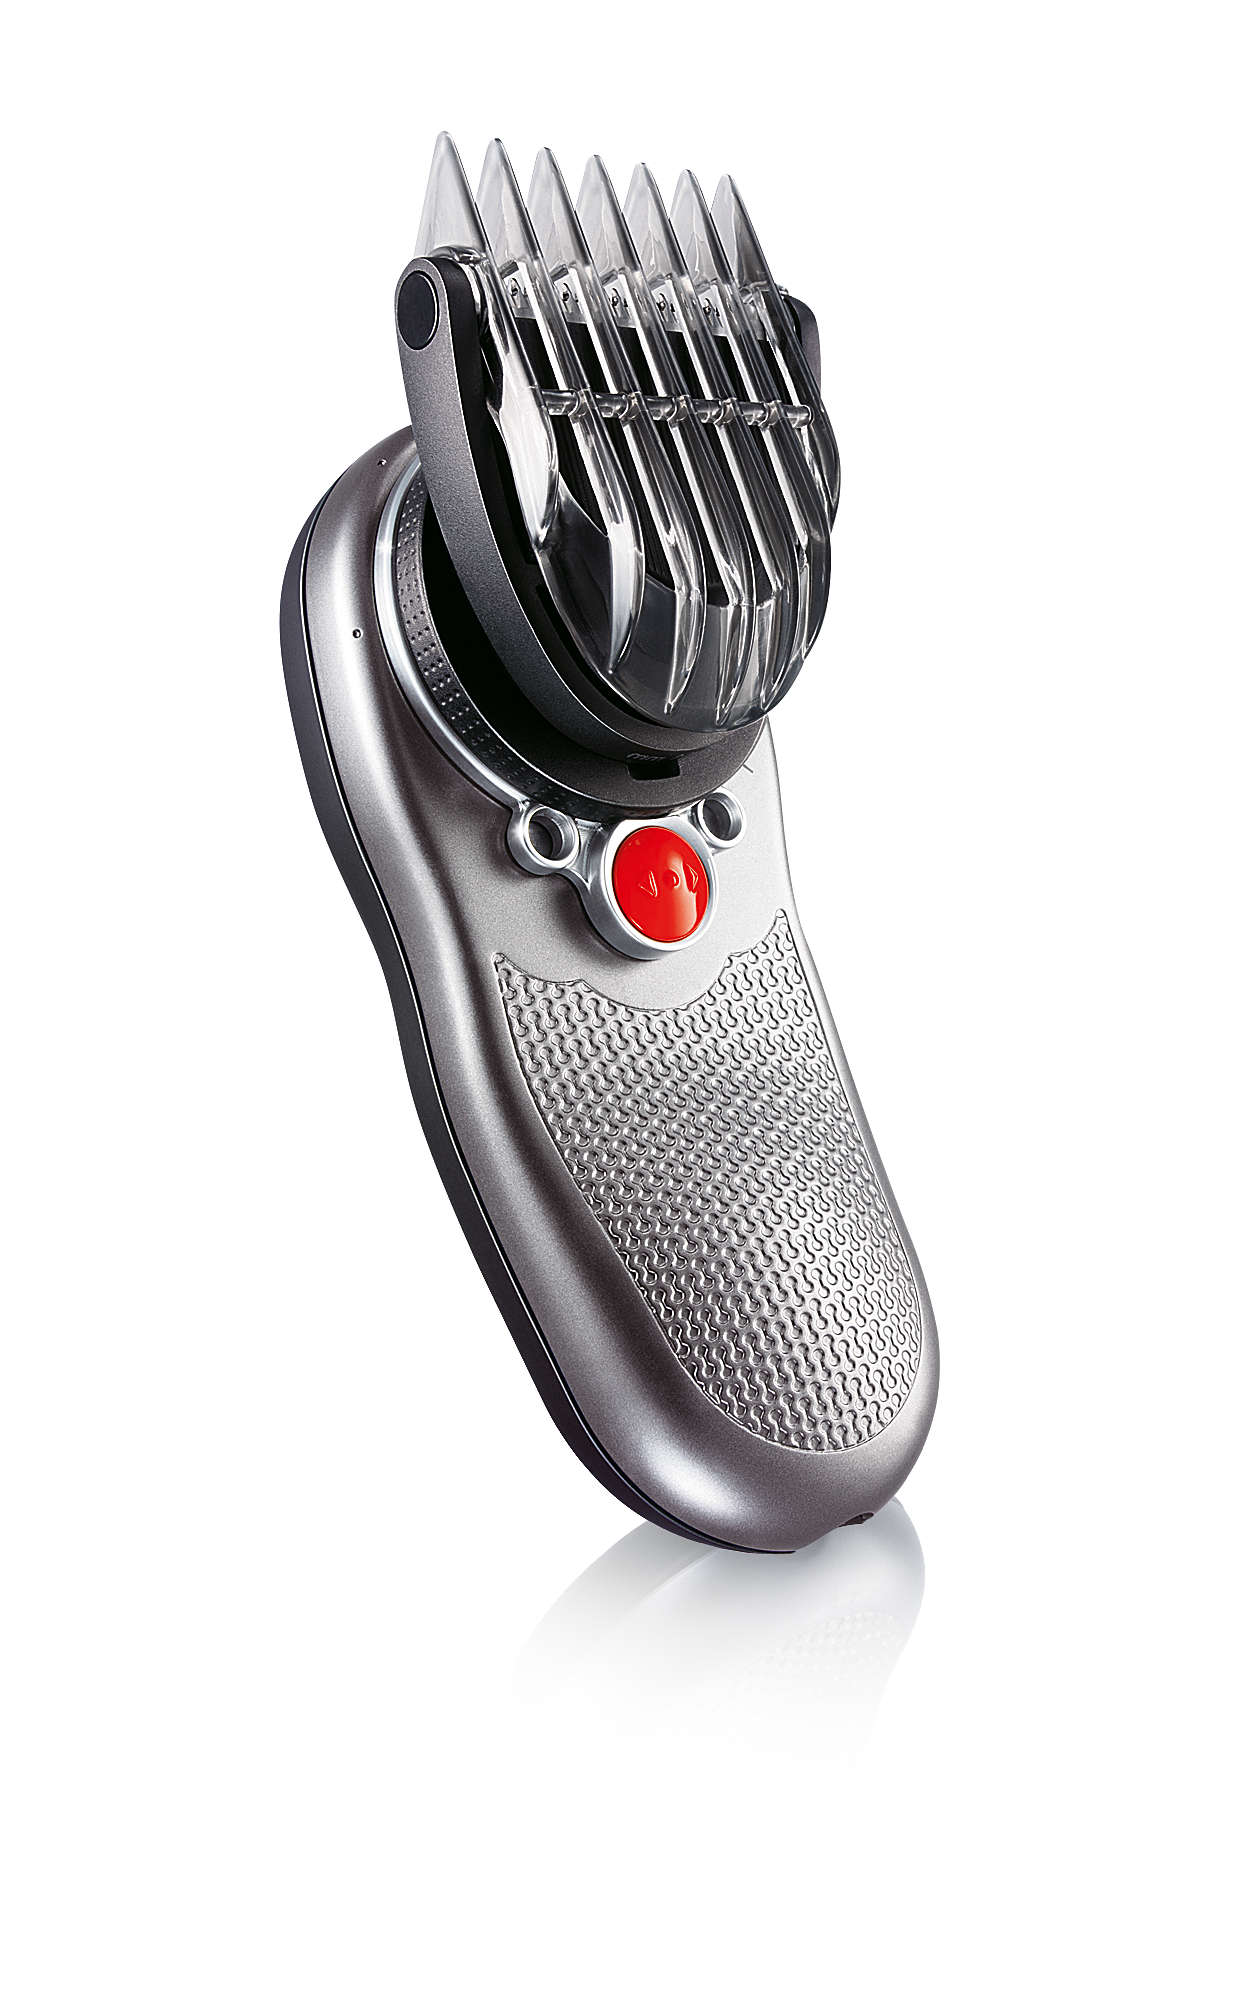 do it yourself hair clipper QC5170/00 | Philips